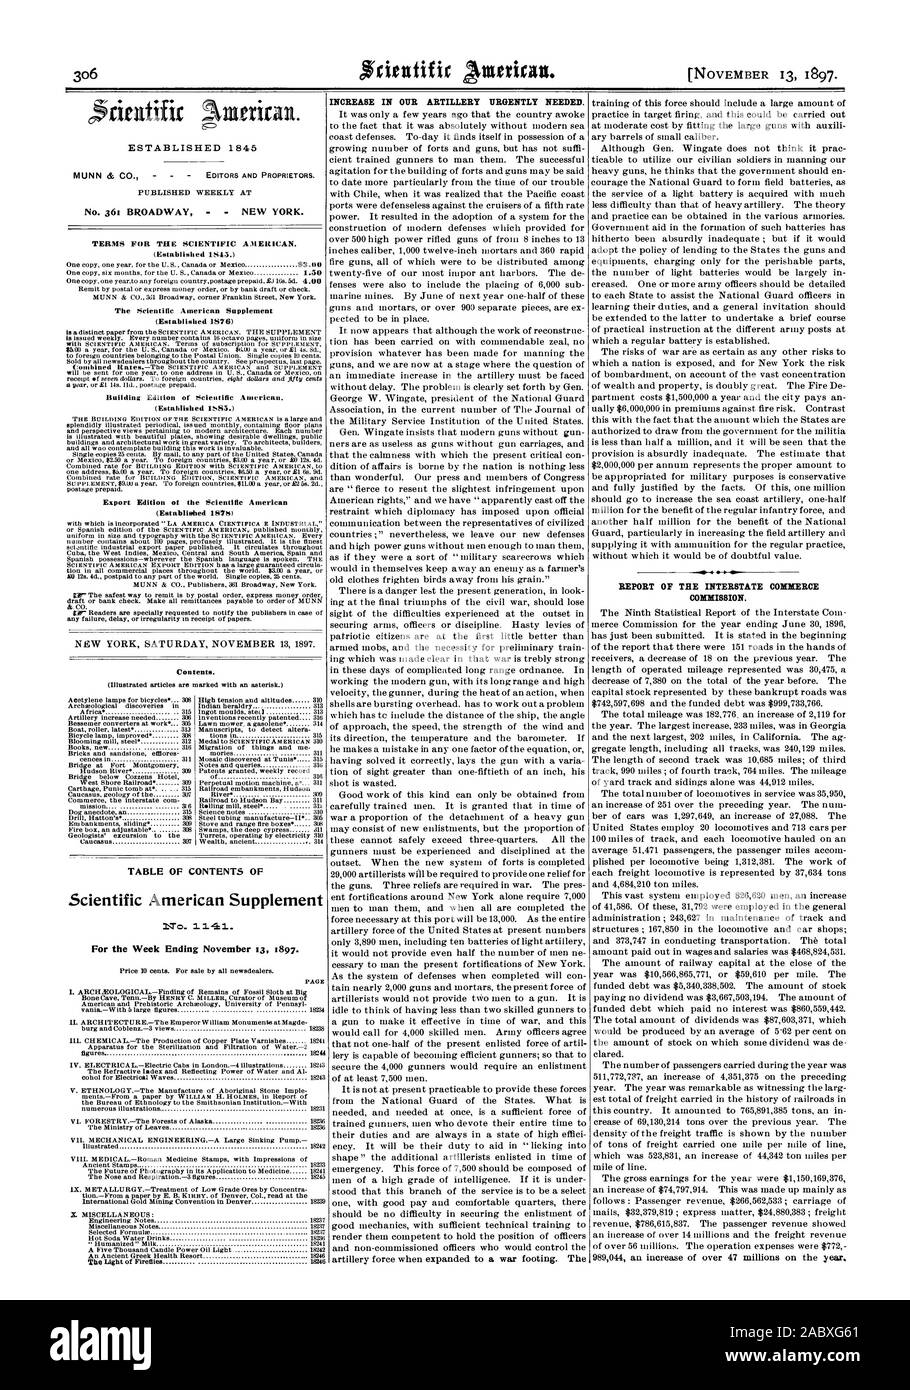 Week Ending November 13 1897. INCREASE IN OUR ARTILLERY URGENTLY NEEDED. REPORT OF THE INTERSTATE COMMERCE COMMISSION. ESTABLISHED 1 845, scientific american, 1897-11-13 Stock Photo